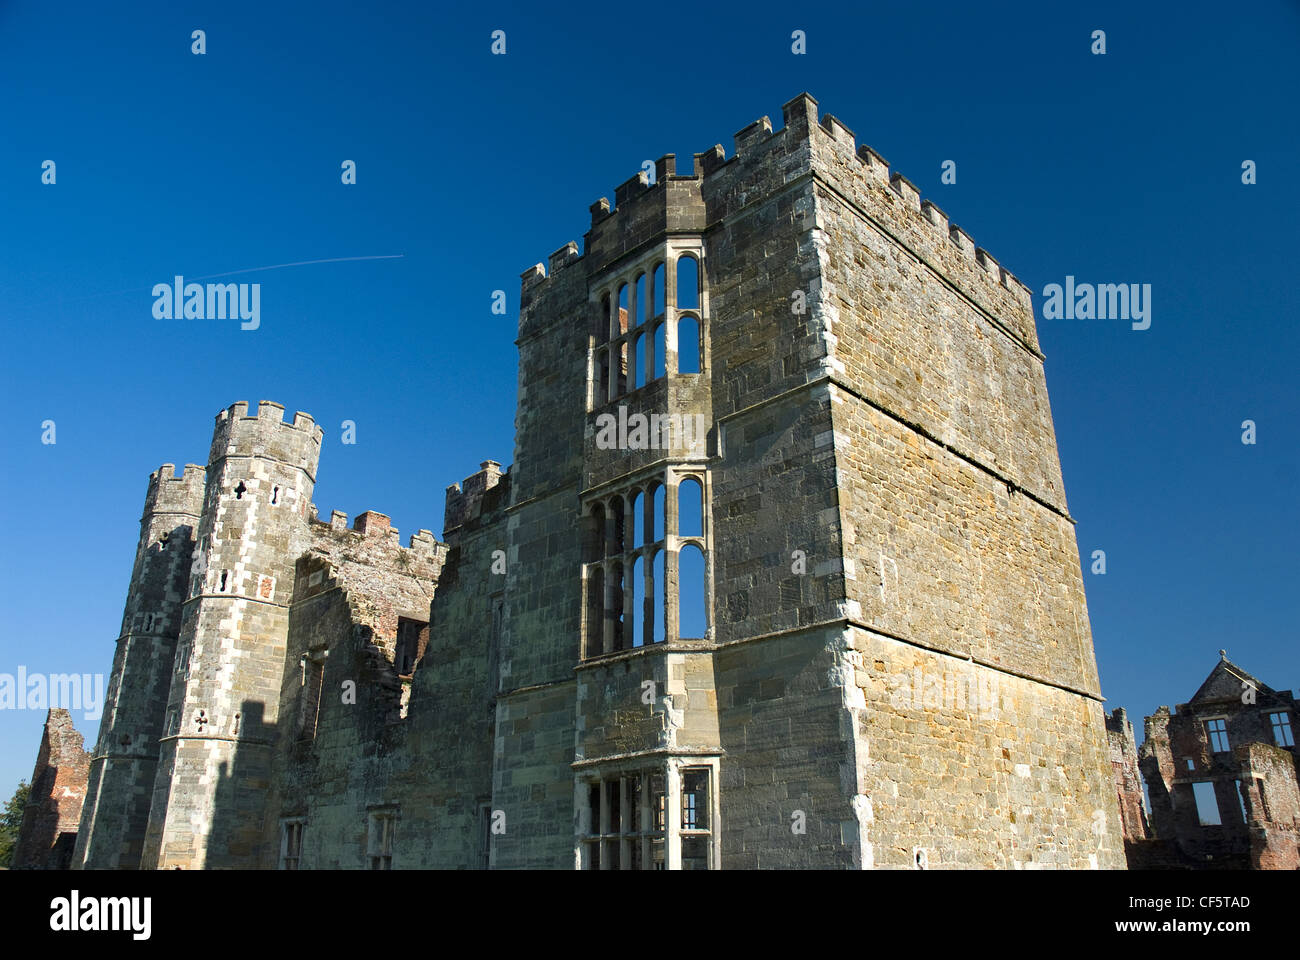 Cowdray Ruins, one of Southern England's most important early Tudor courtier's palaces set in the grounds of Cowdray Park. Stock Photo